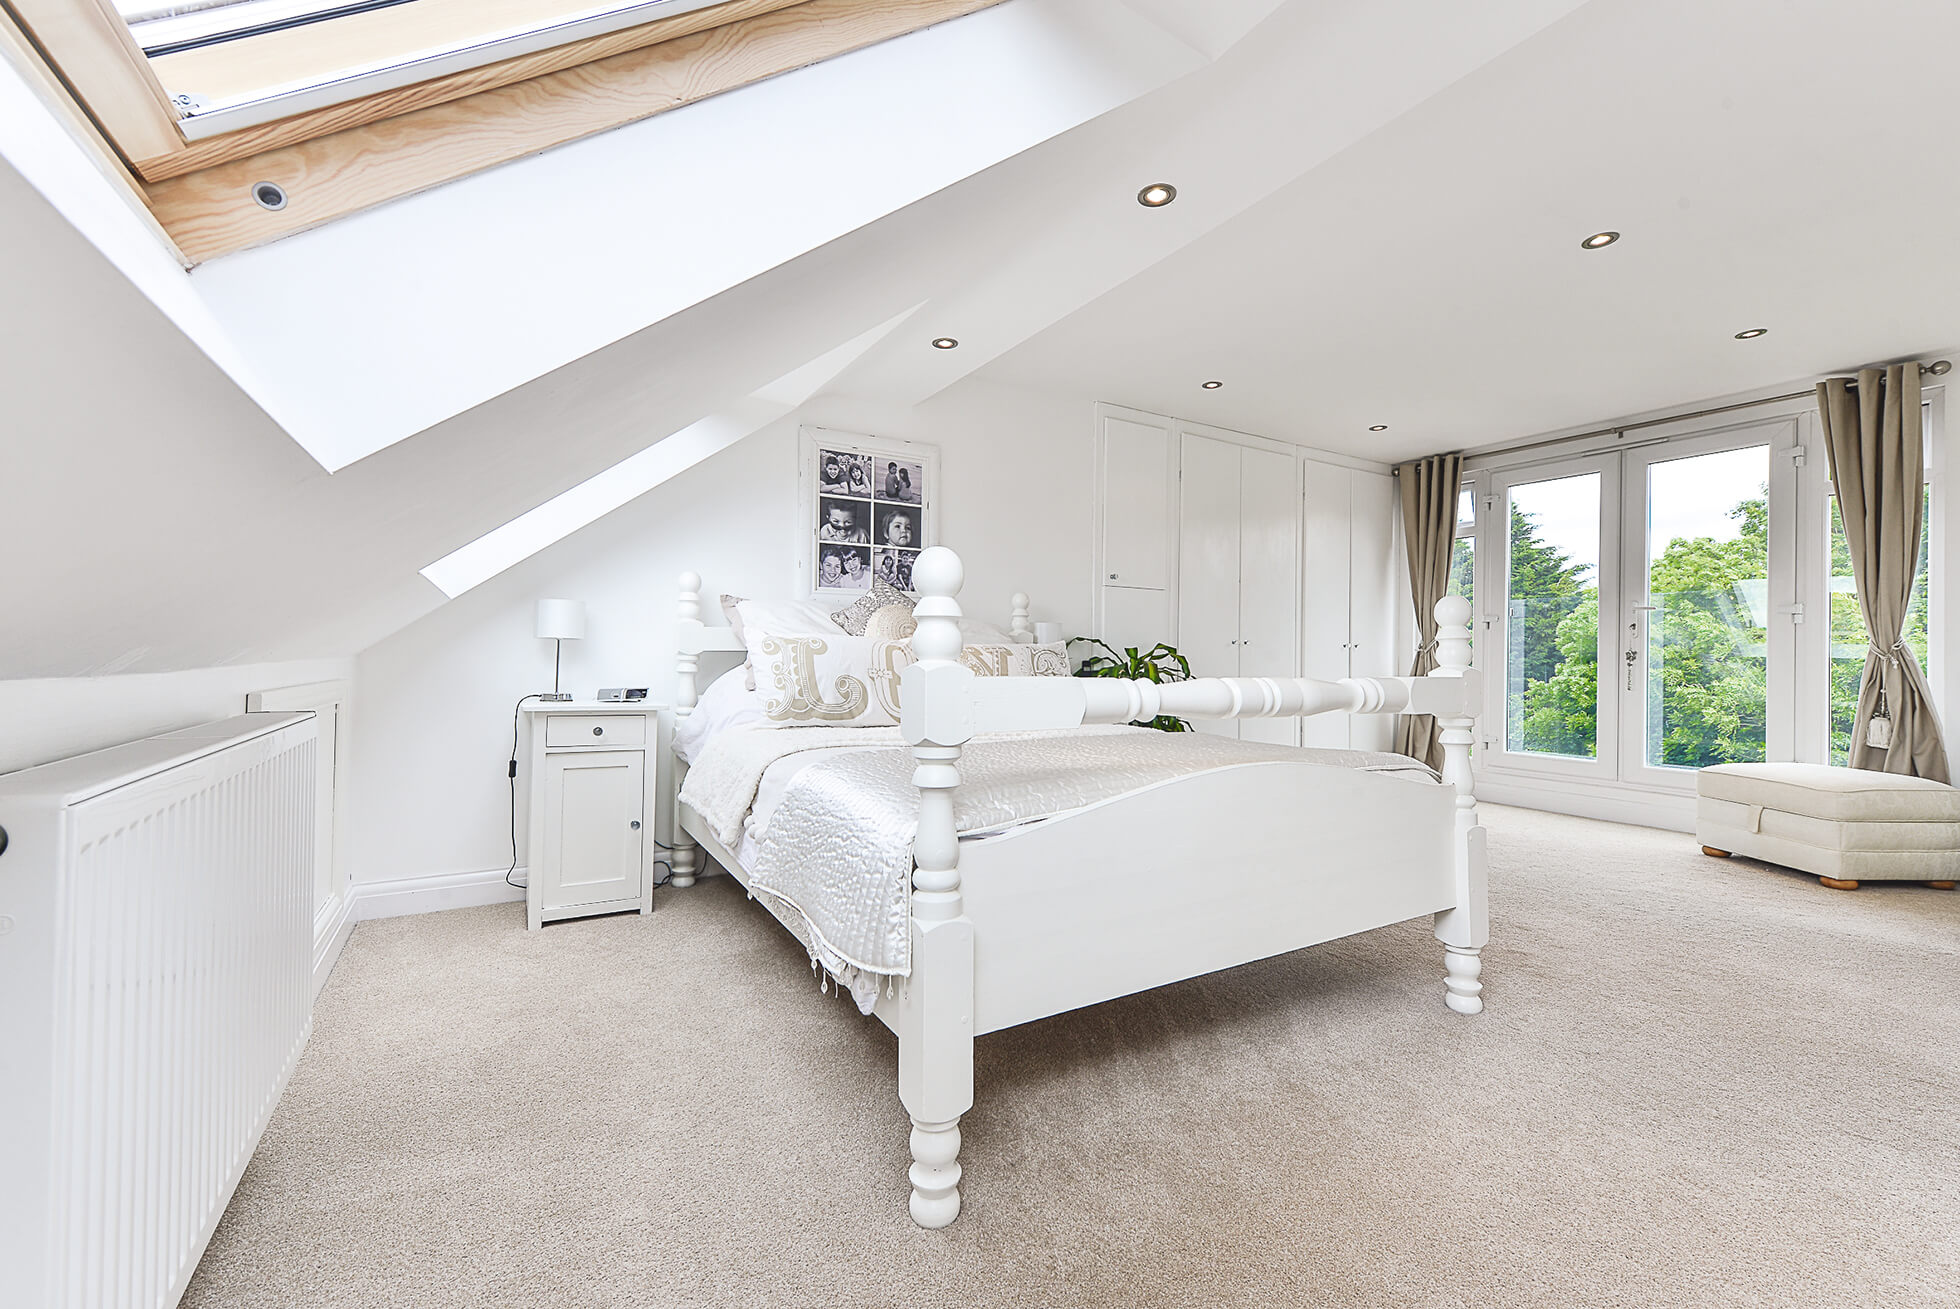 Do you have a question about converting your Loft in Stevenage? Here are the most popular questions asked by our clients.